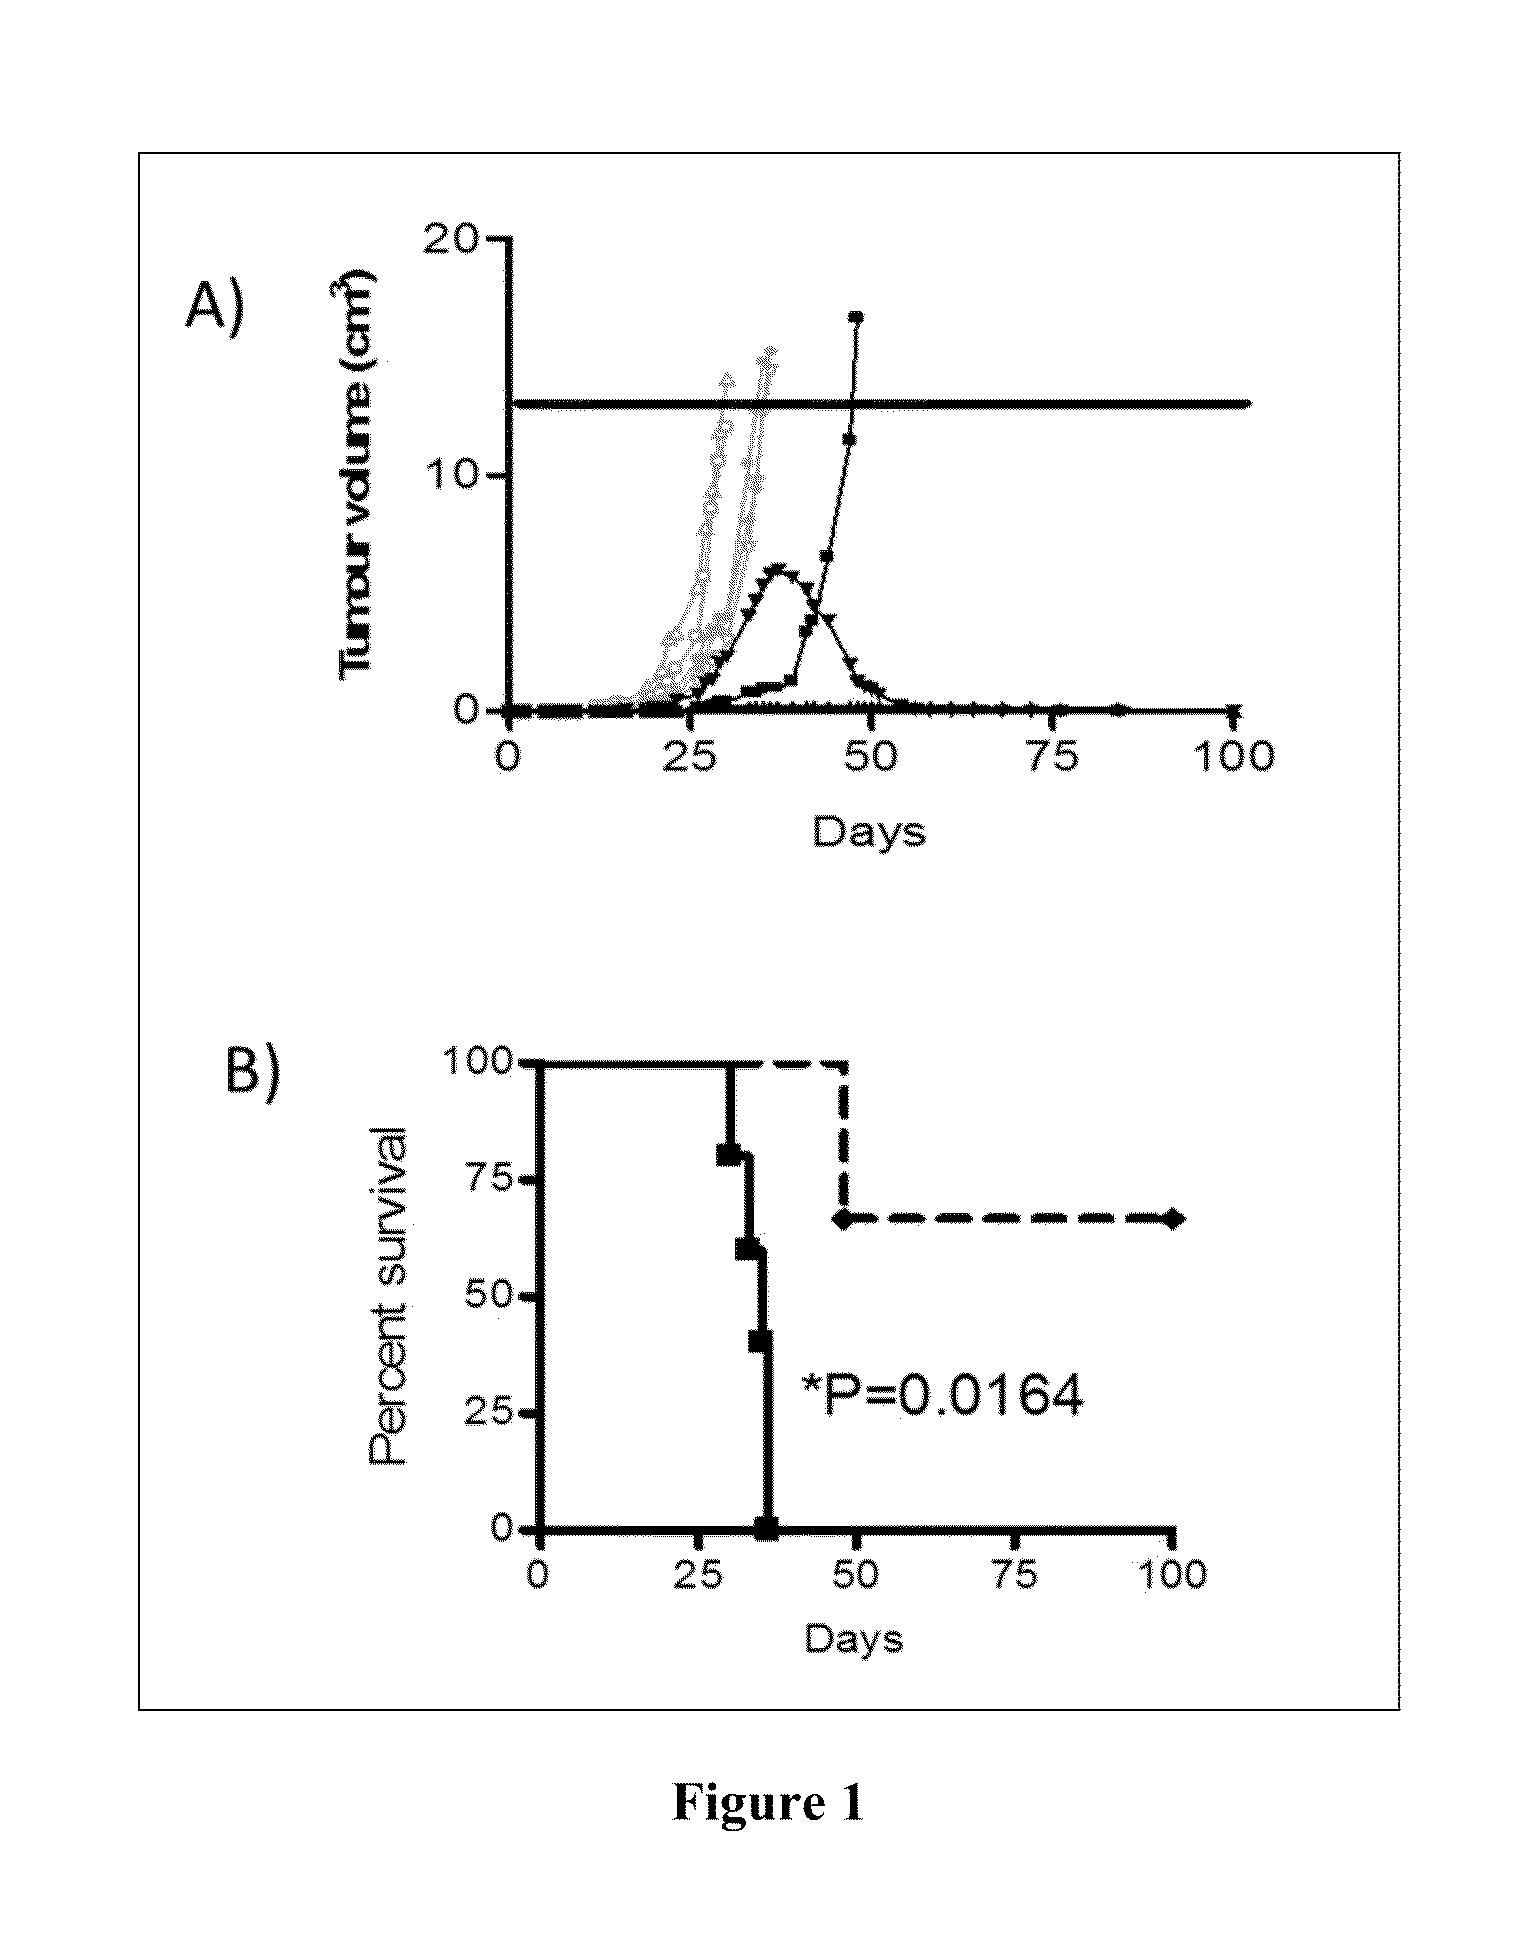 Vaccines for the treatment of cancer and compositions for enhancing vaccine efficacy